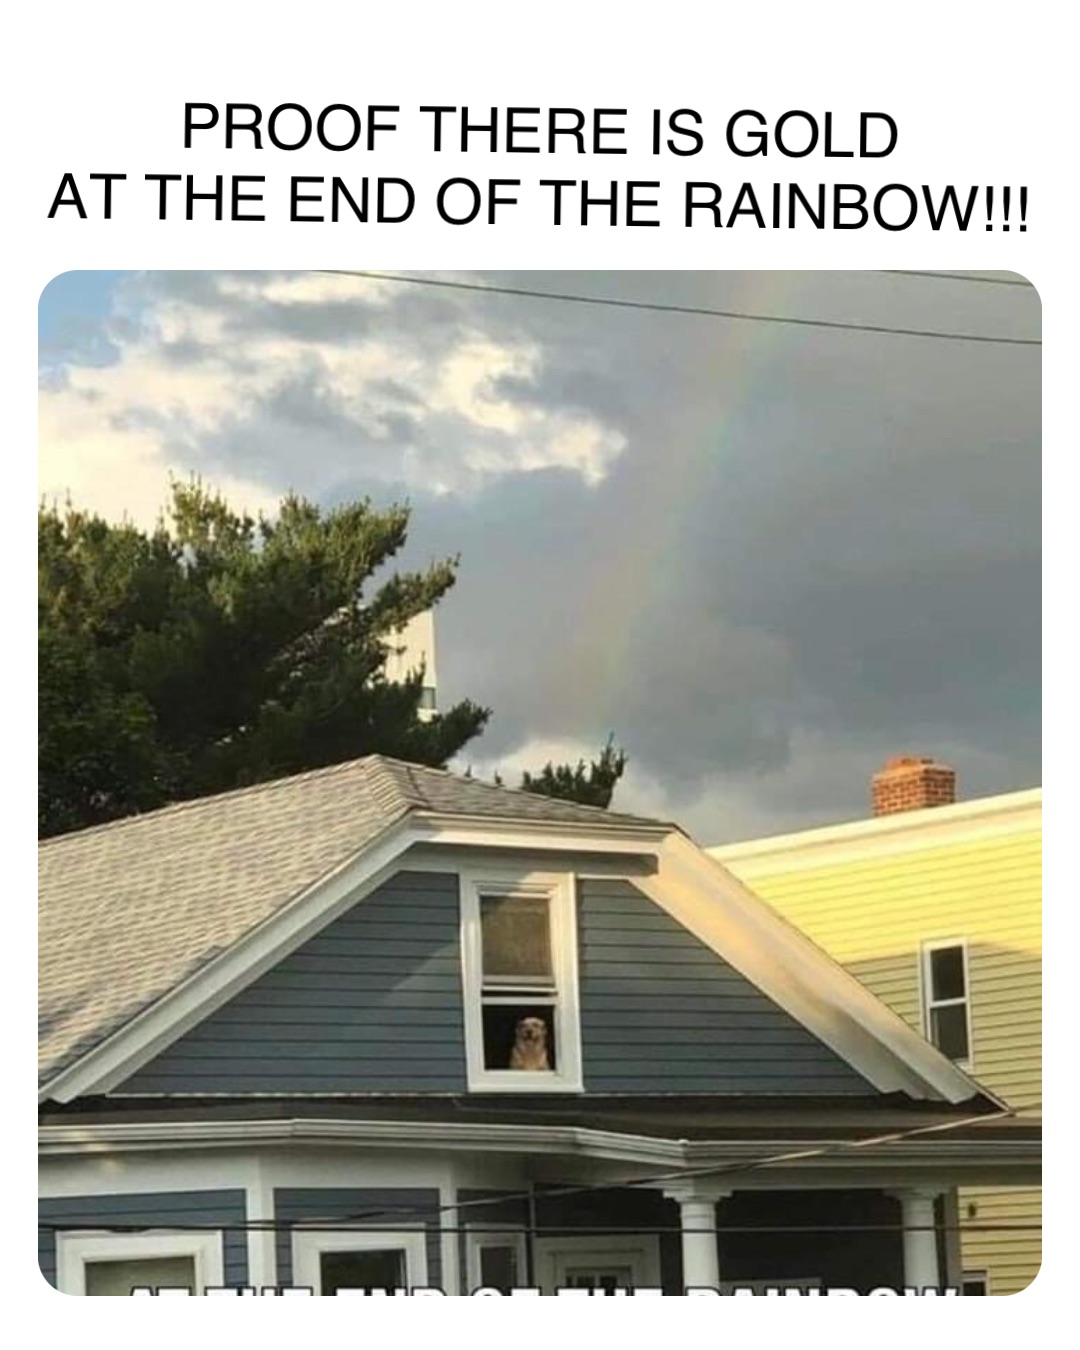 Double tap to edit PROOF THERE IS GOLD
AT THE END OF THE RAINBOW!!!